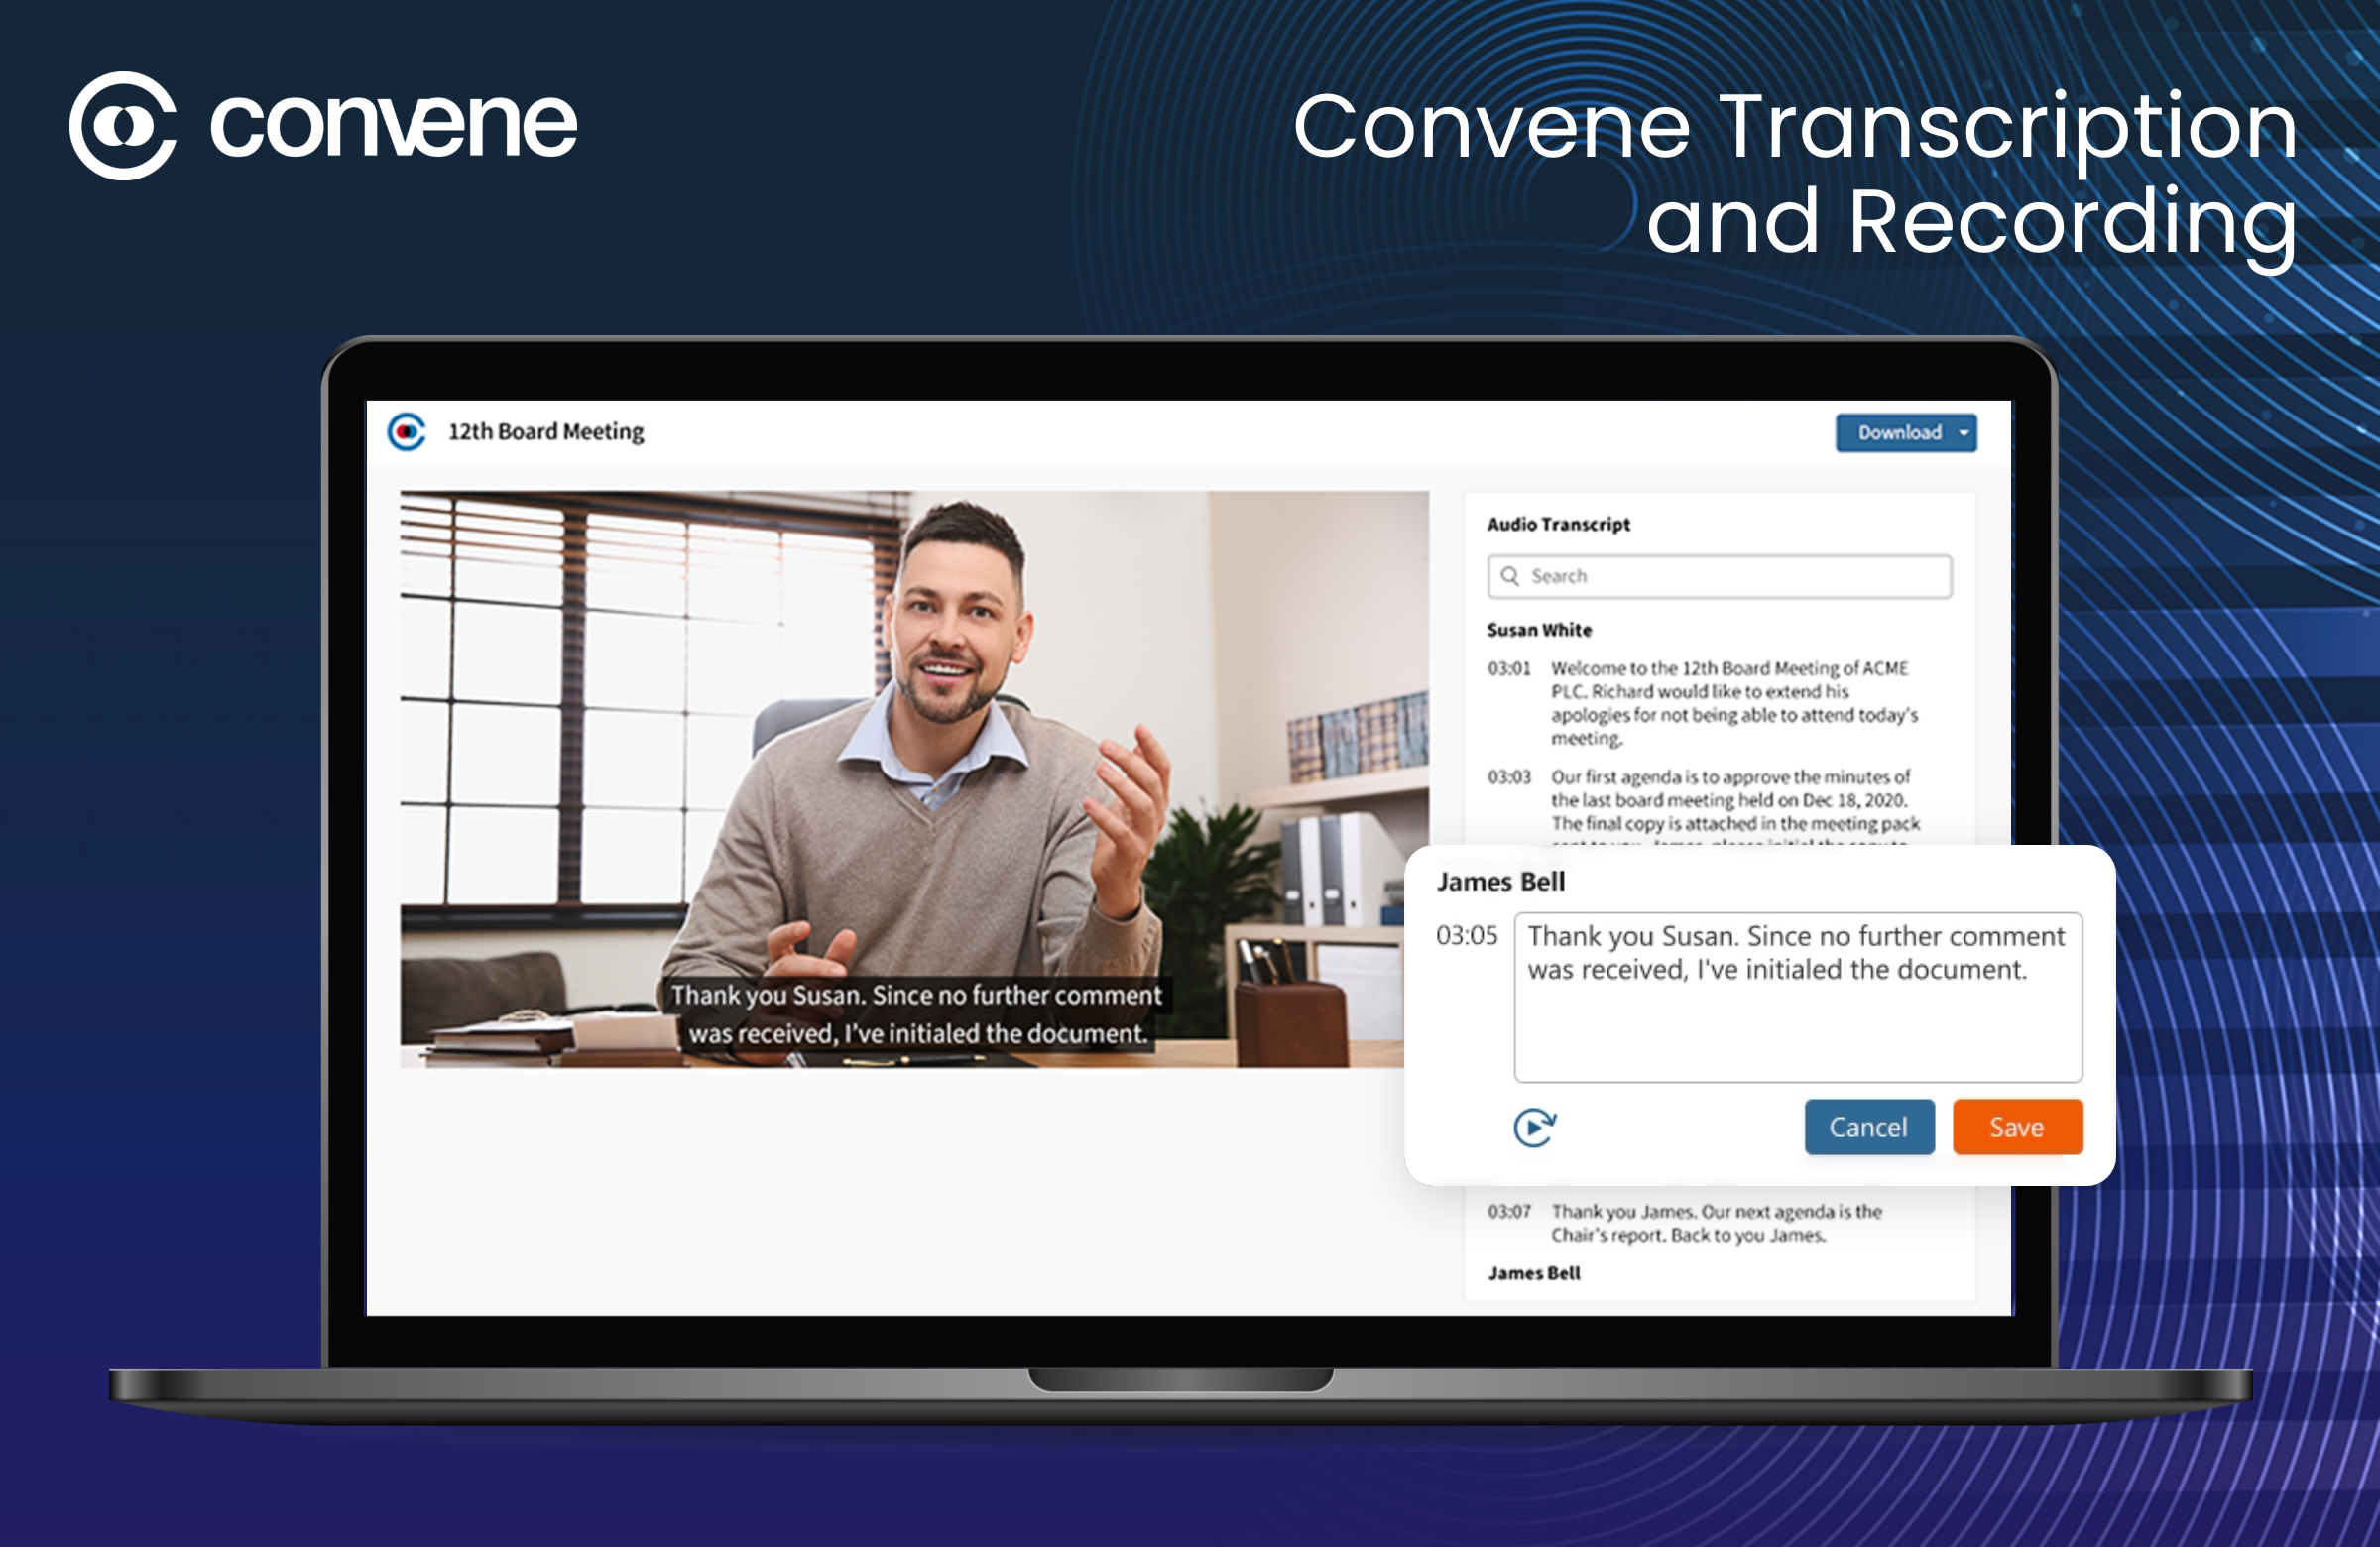 Effortlessly generate meeting recordings and transcription after meetings, allowing directors to view the meeting transcription as the recording plays within Convene.